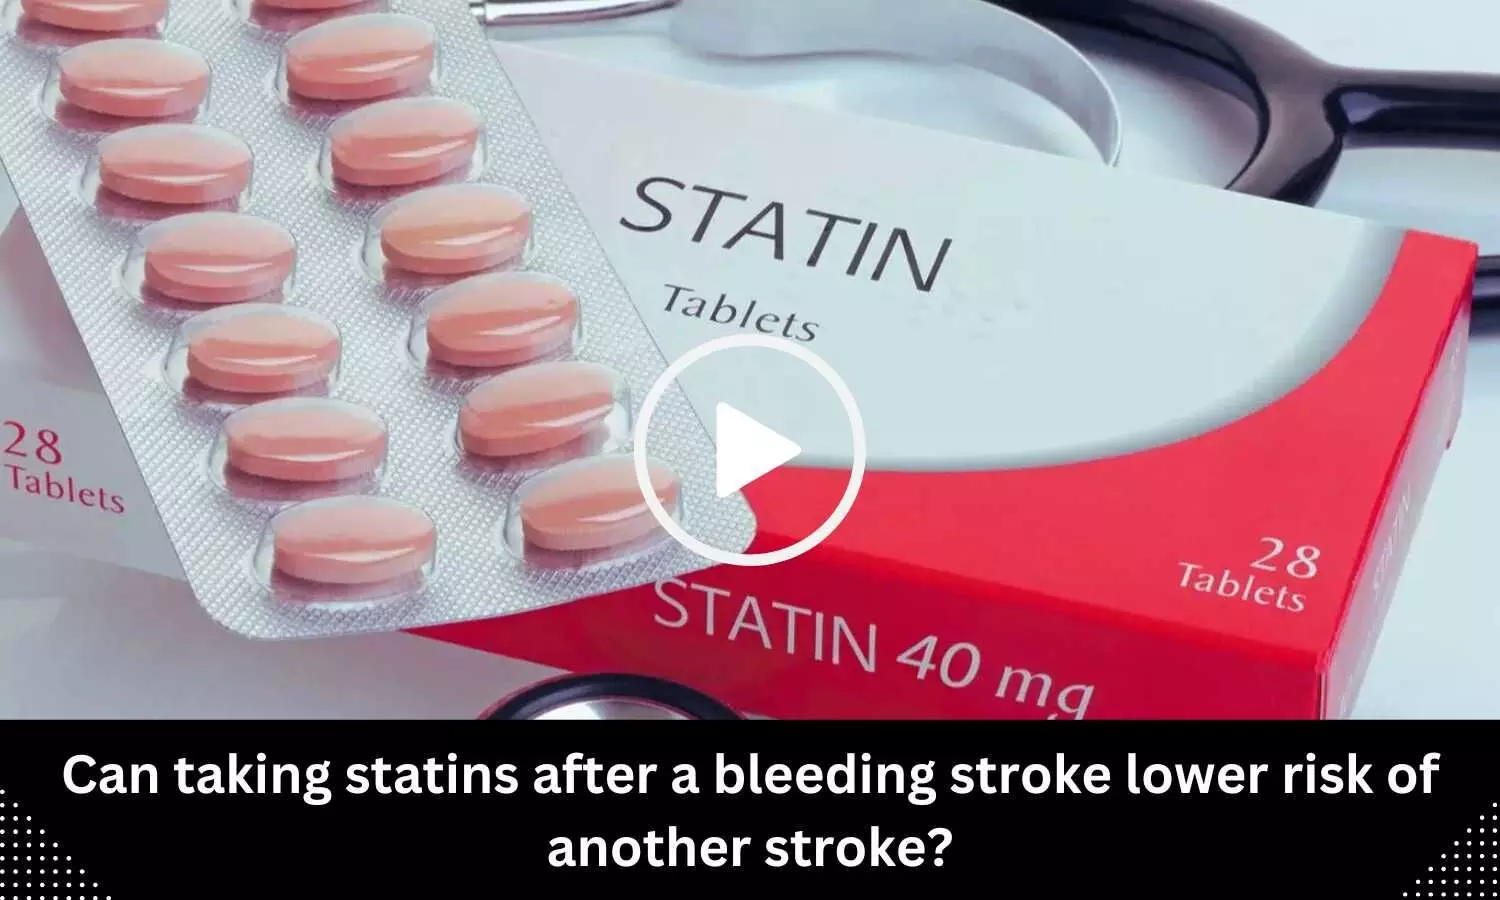 Can taking statins after a bleeding stroke lower risk of another stroke?